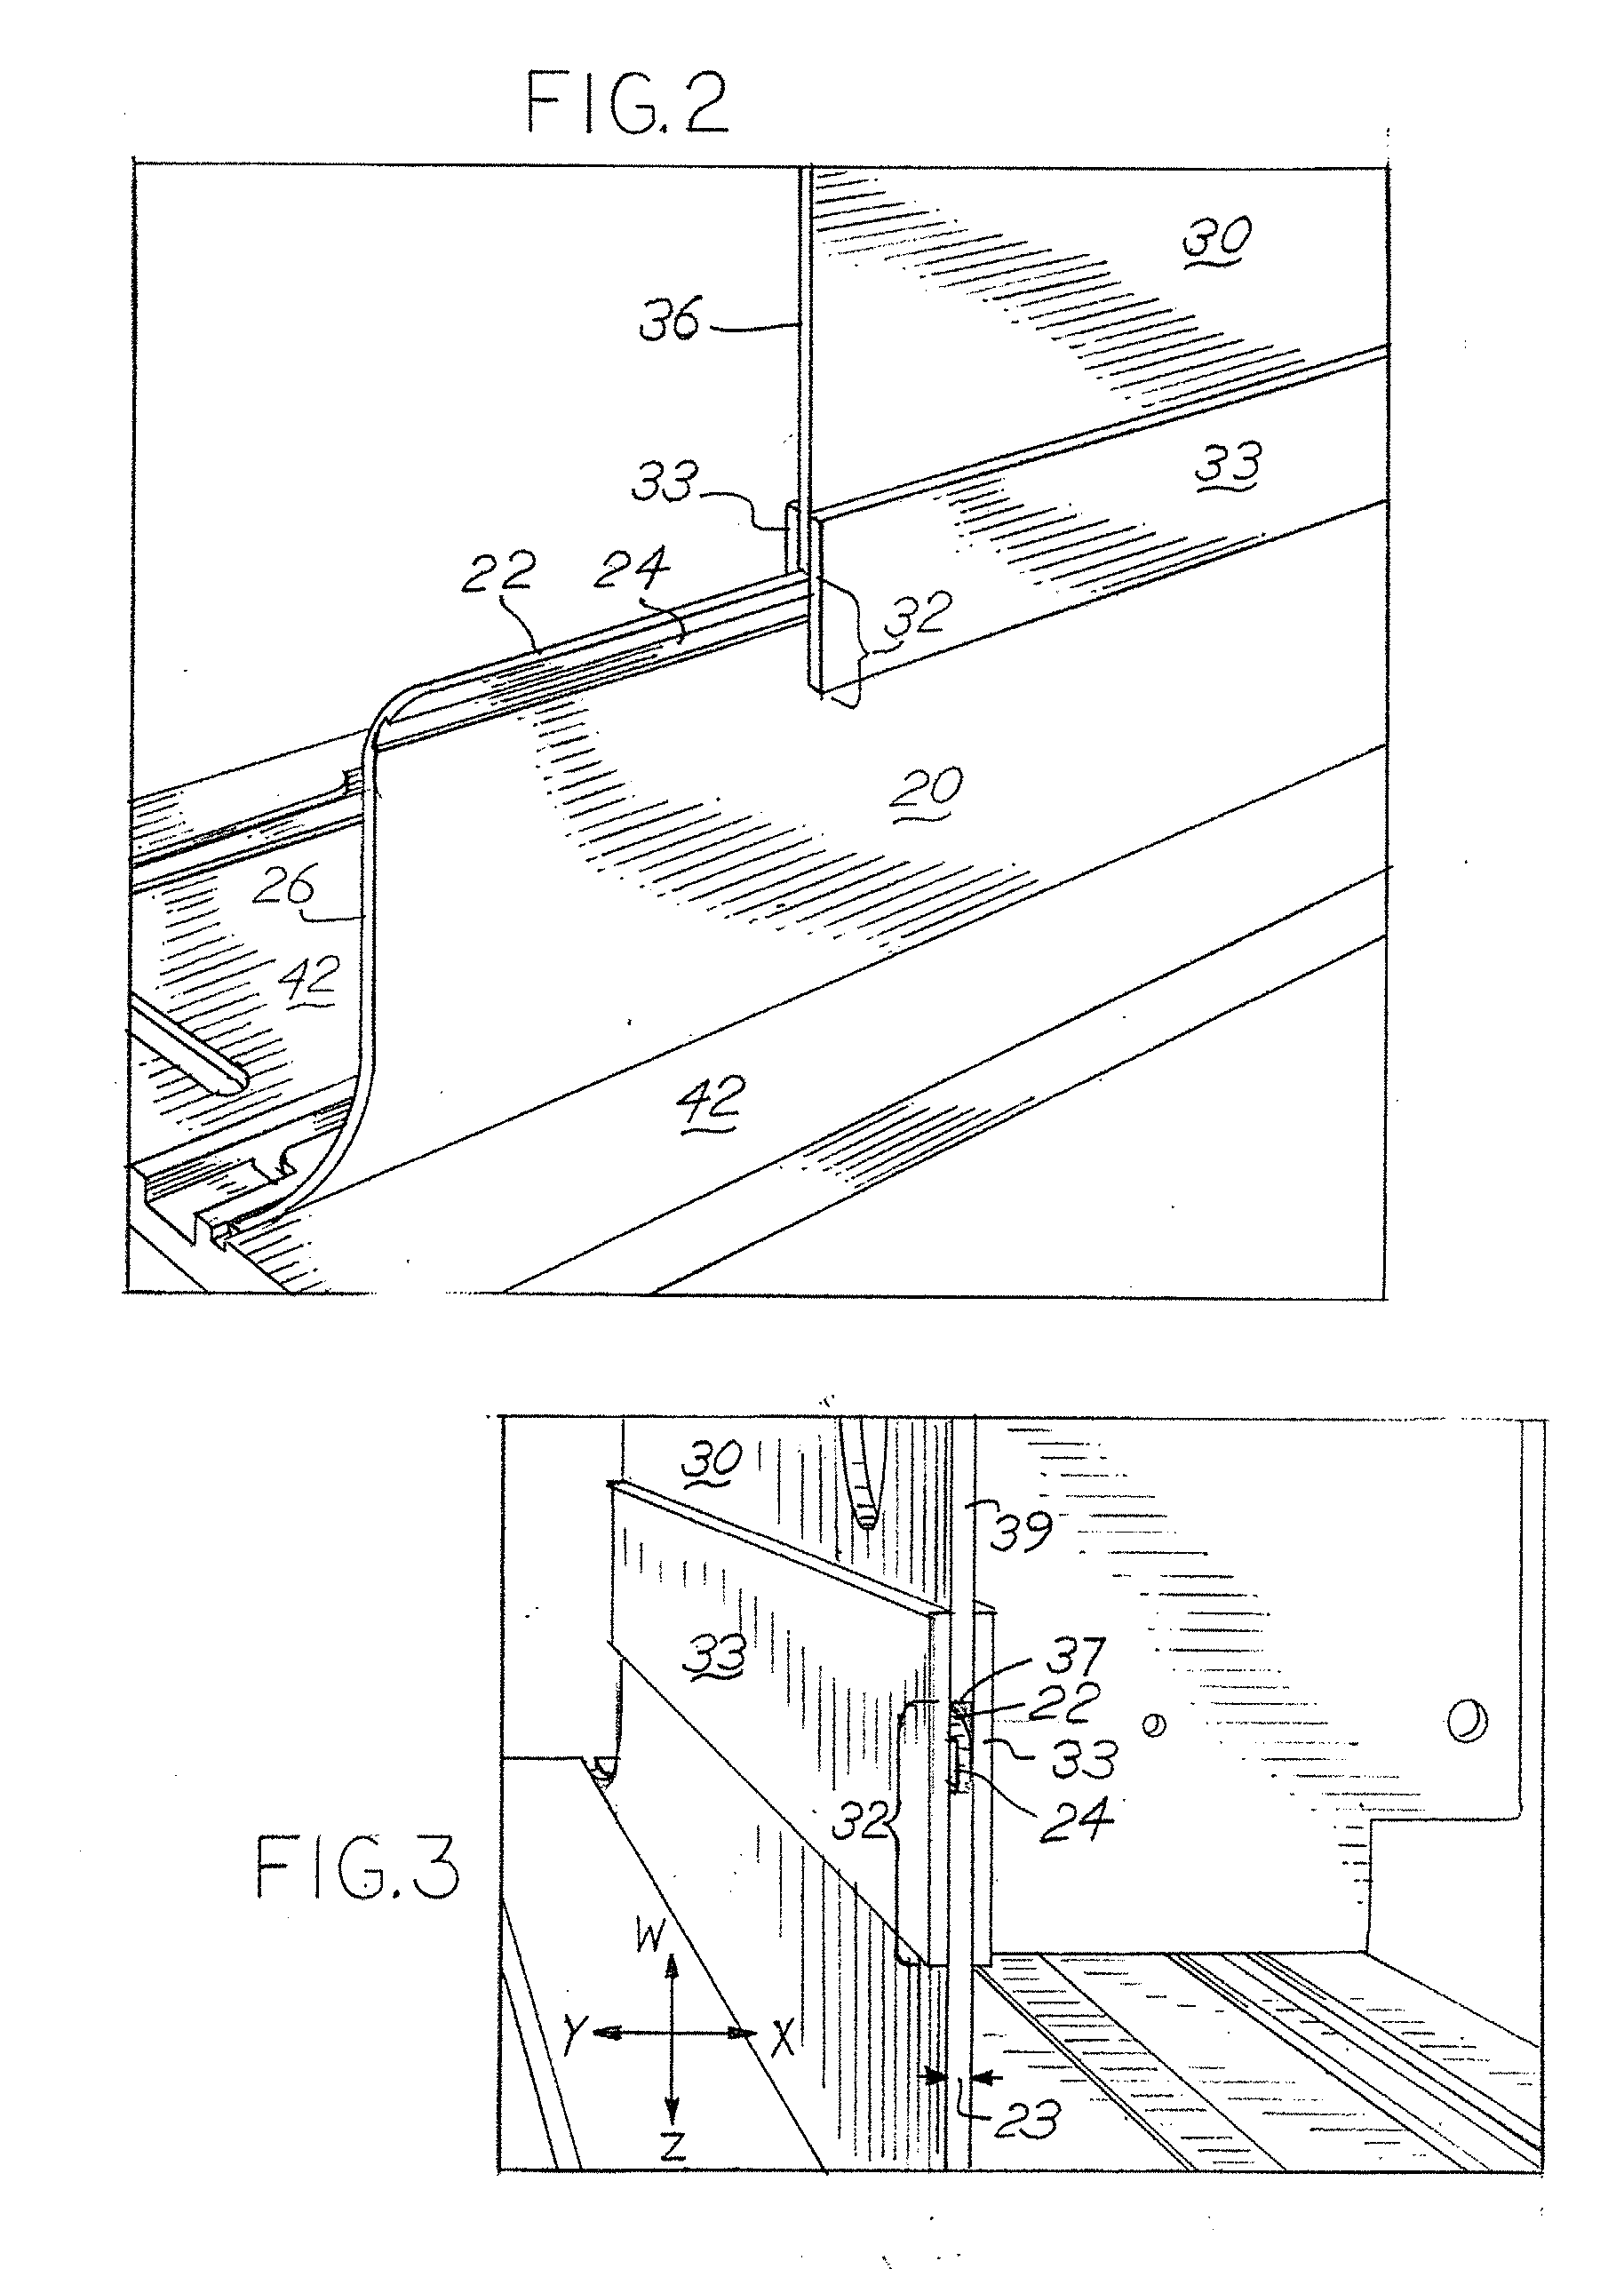 Multi-Component Display and Merchandise Systems